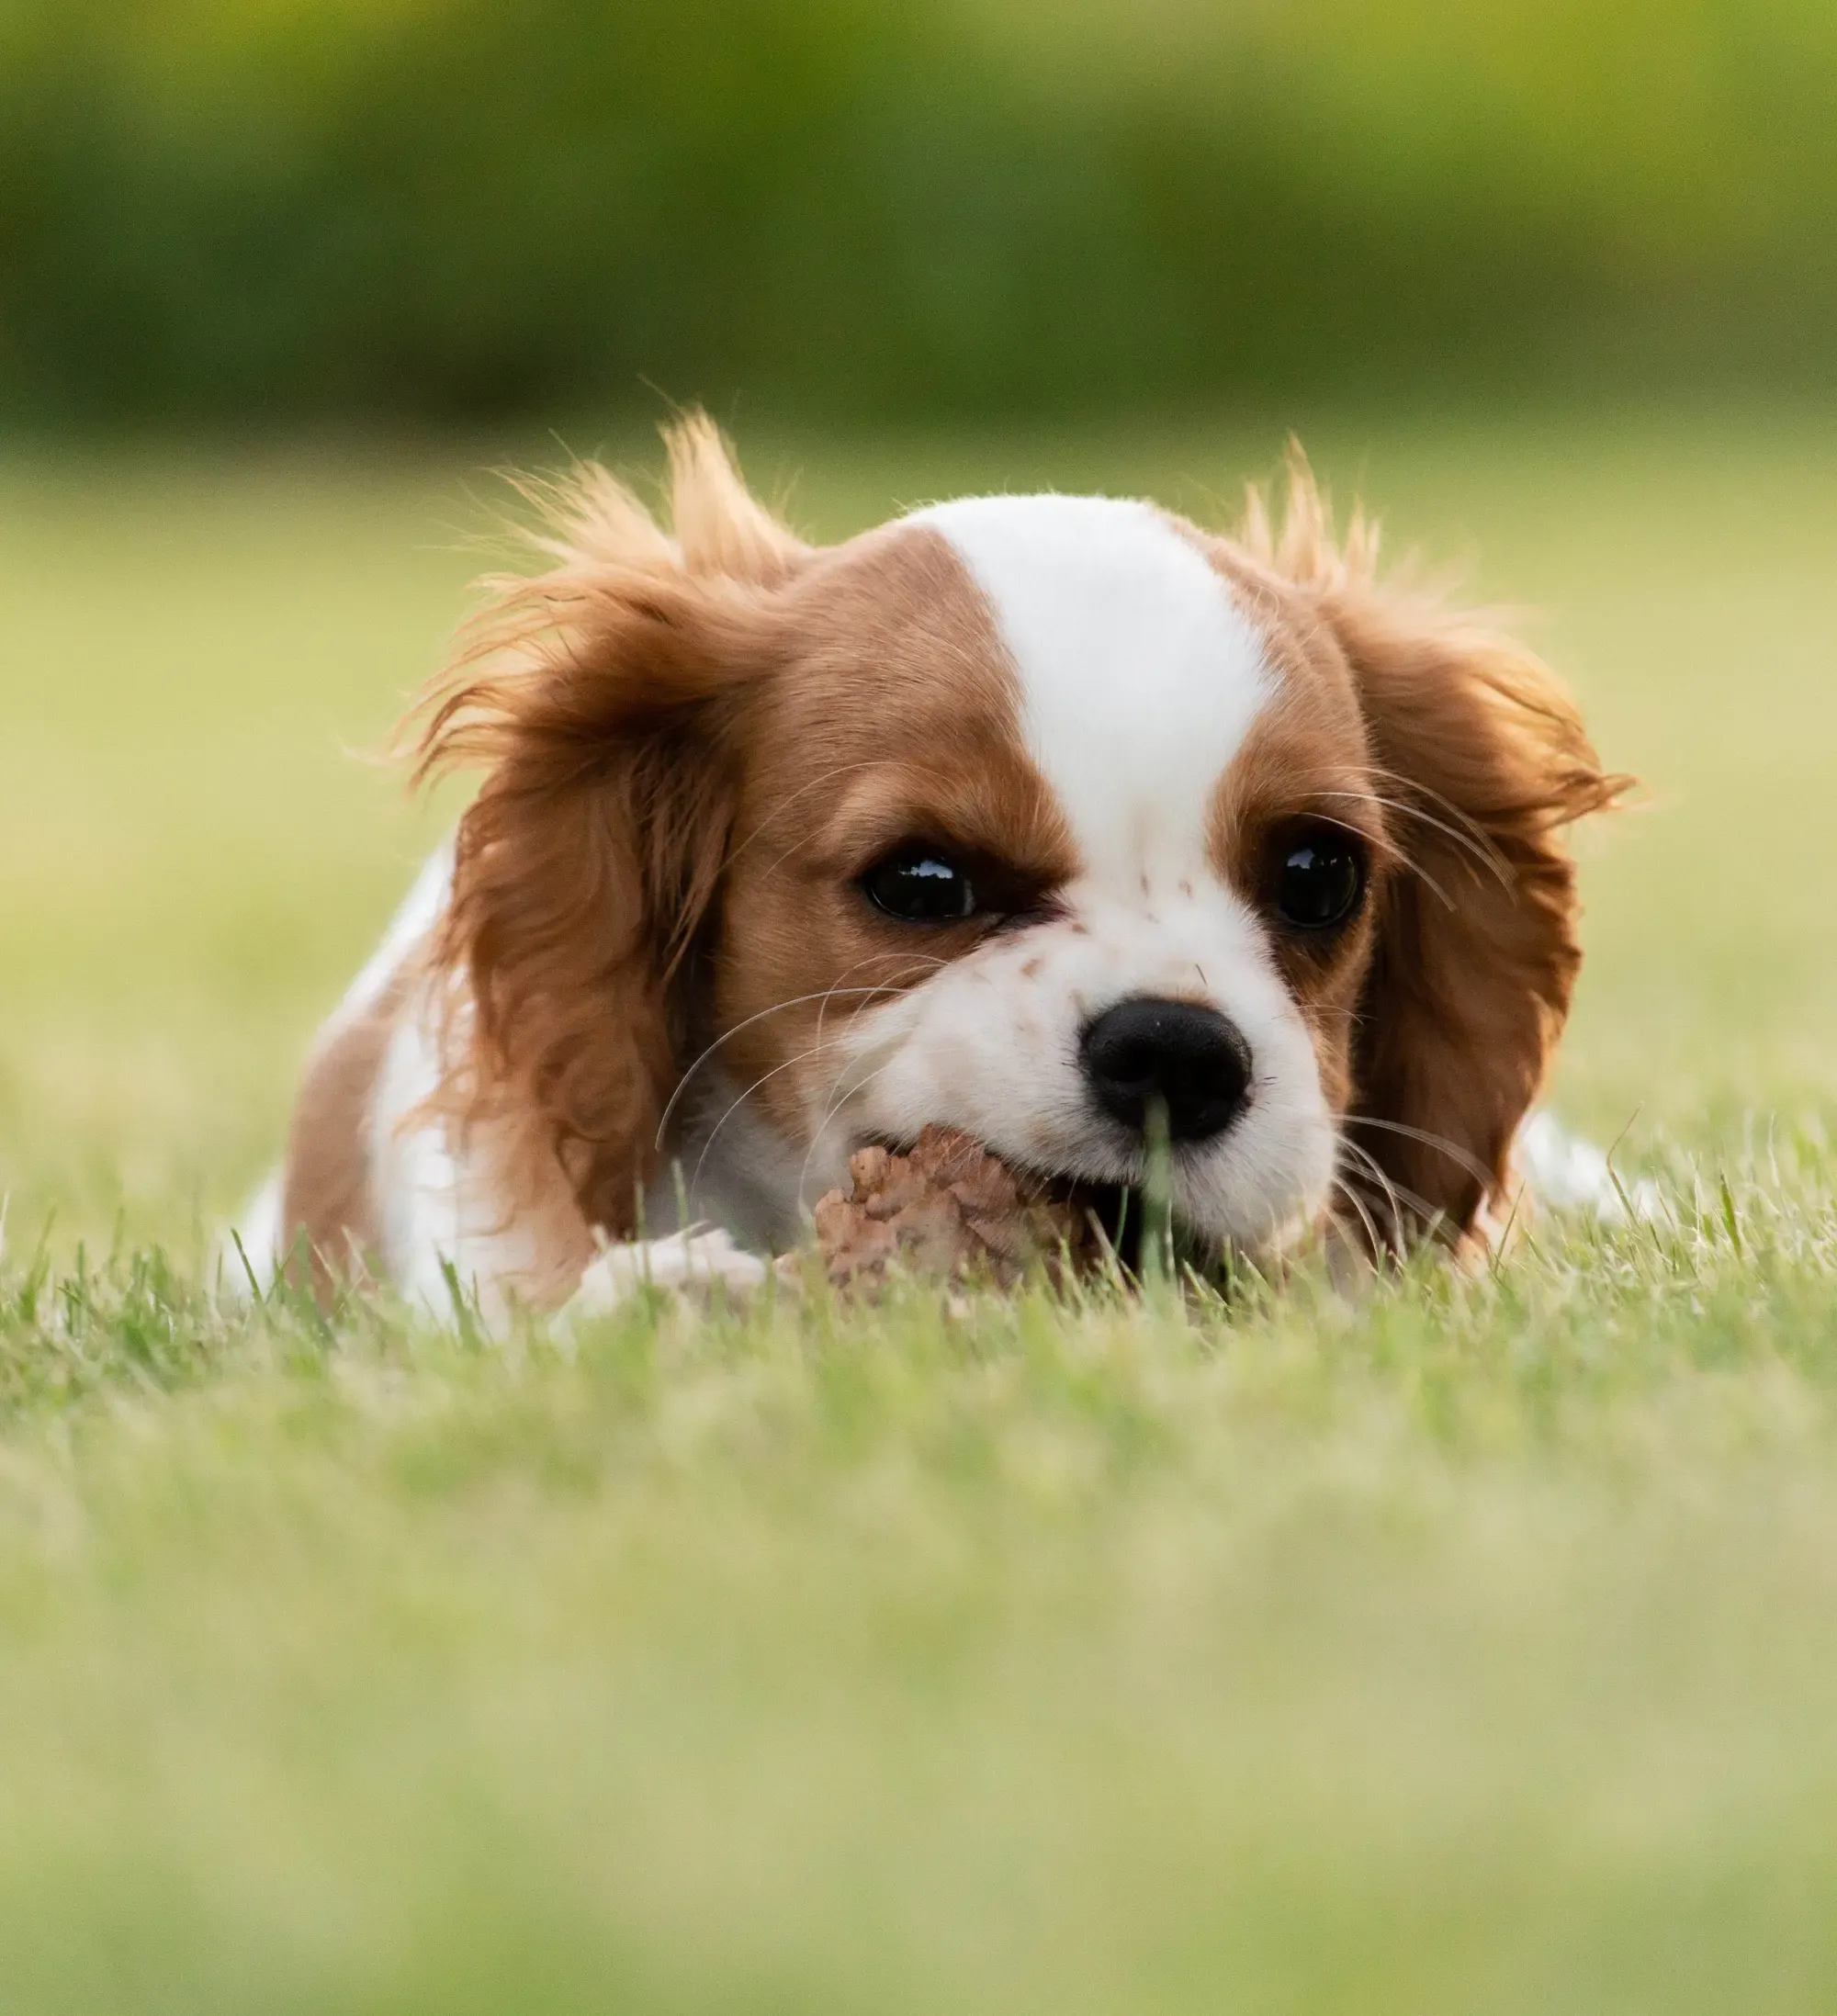 the adaptable nature of Cavaliers makes